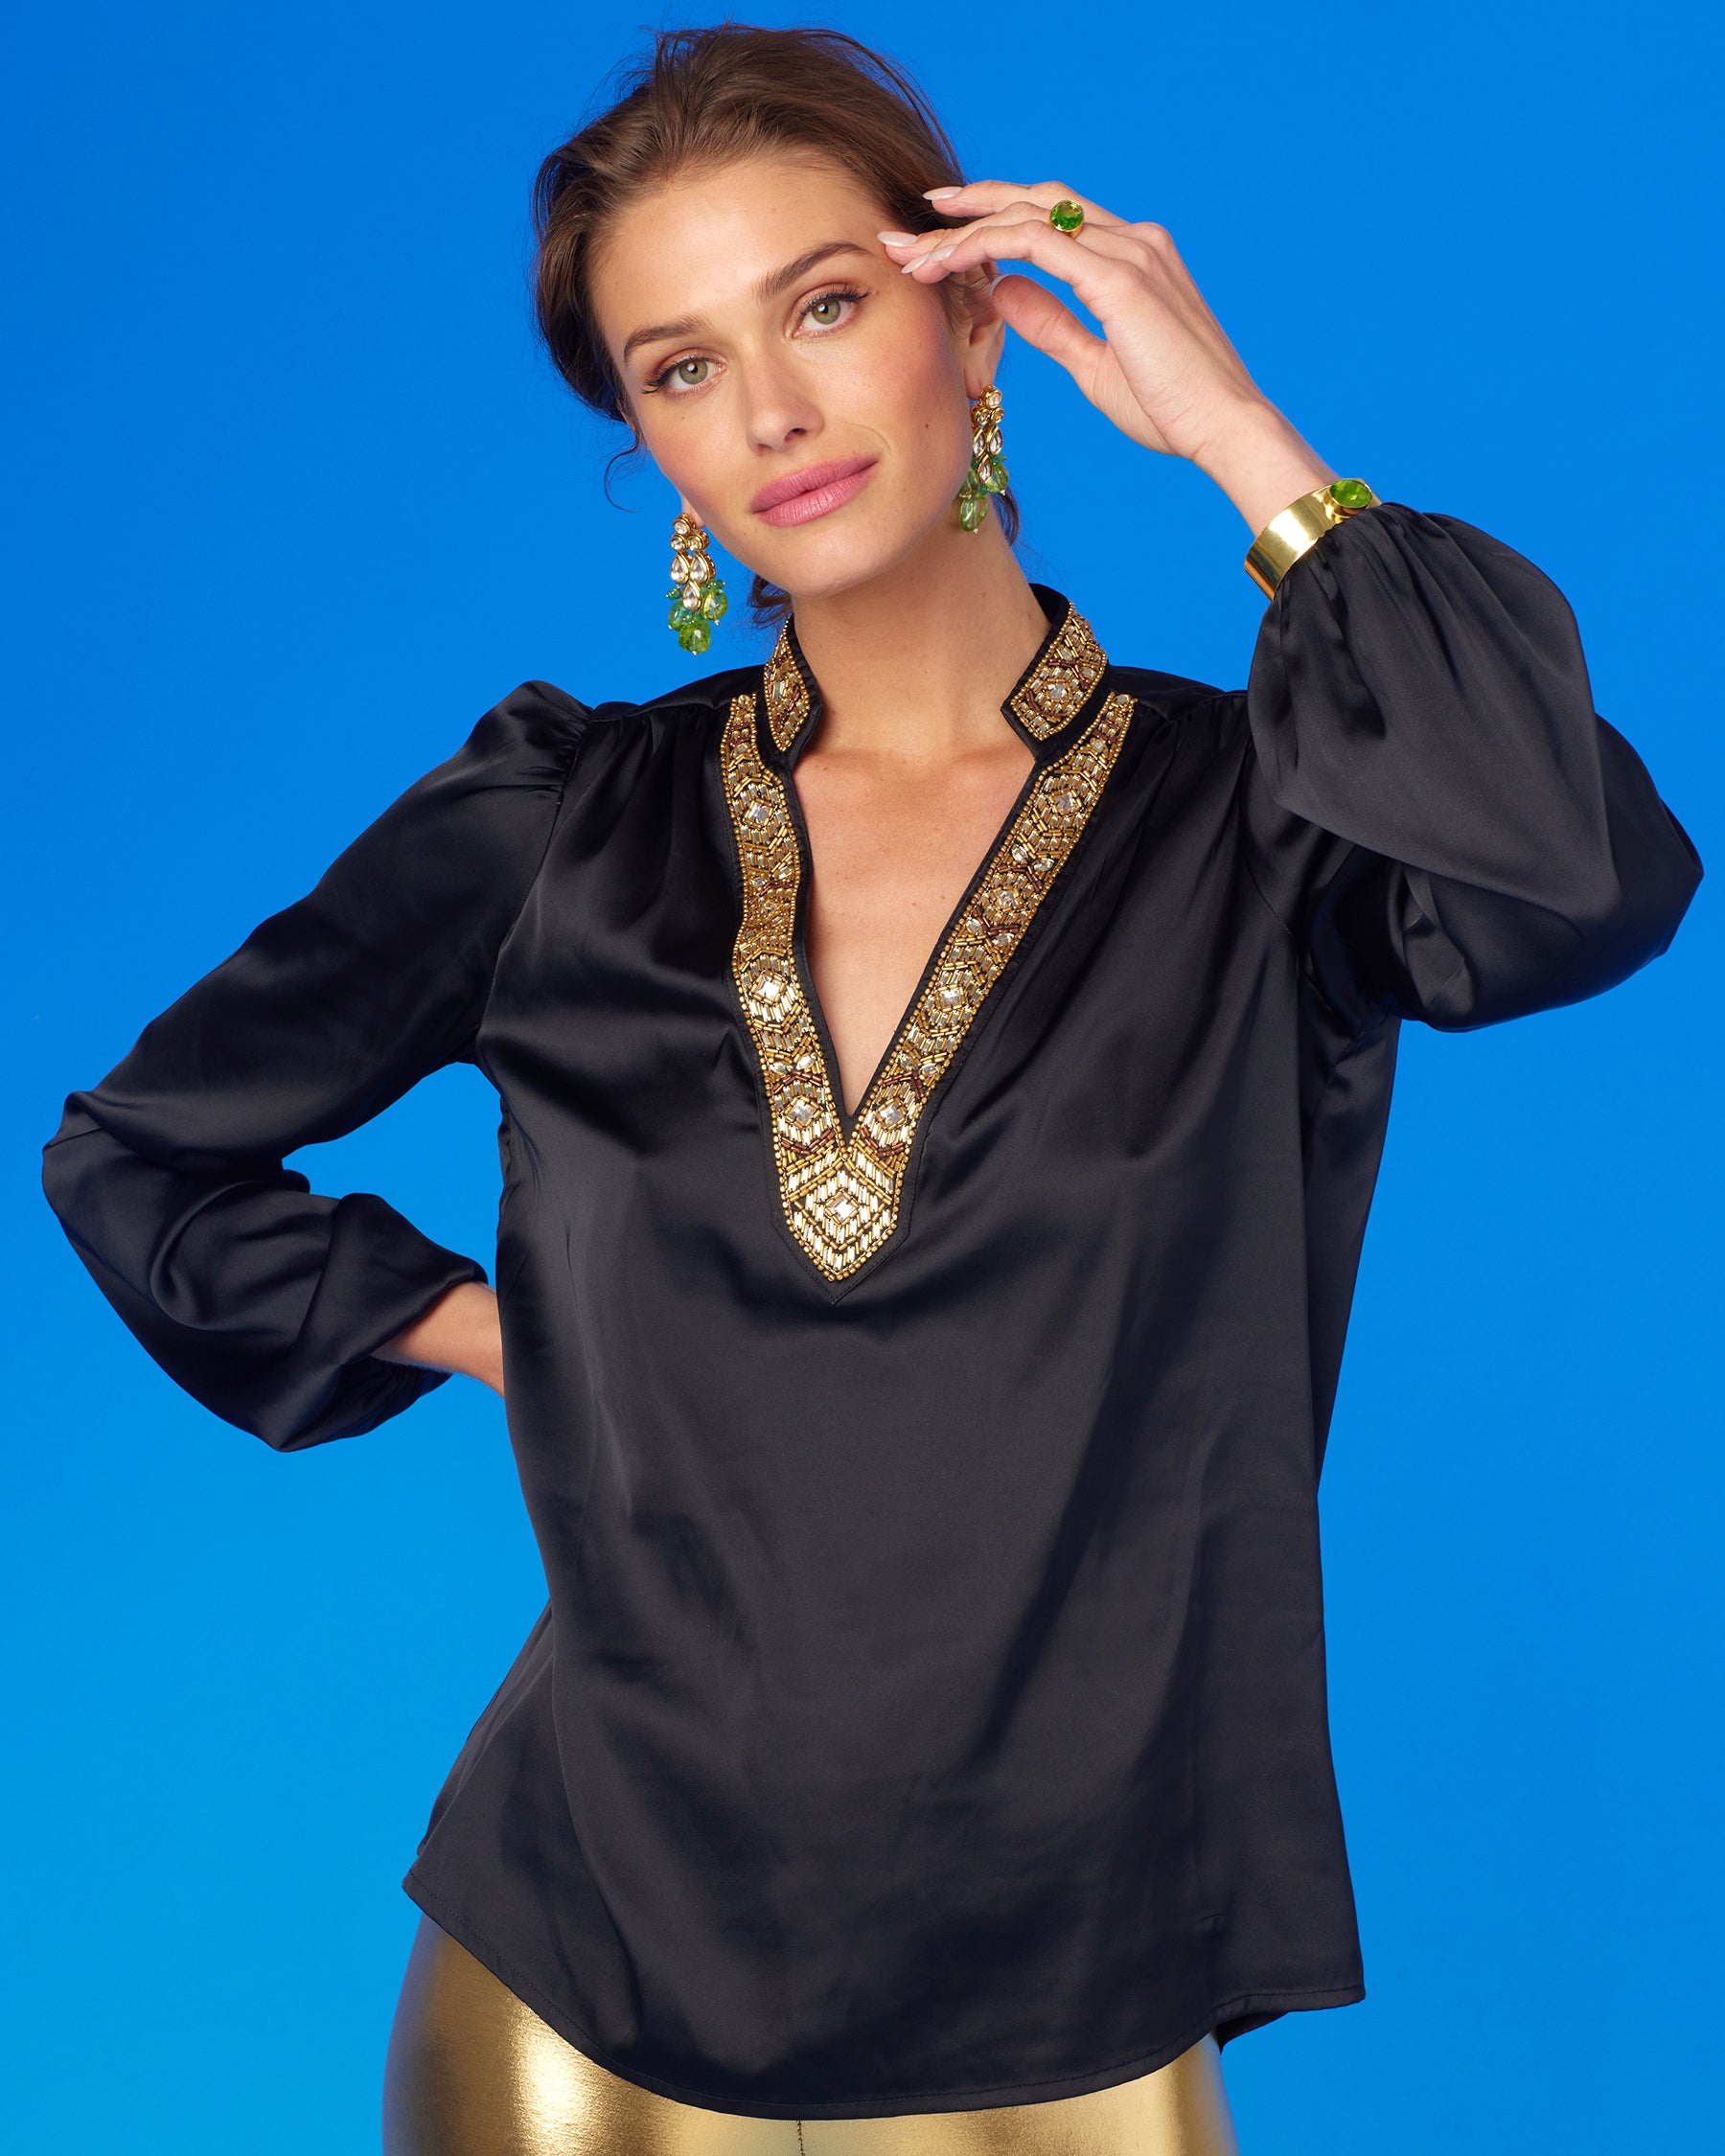 Anastasia Blouse in Black and Art Deco Embellishment with shirt worn untucked and arm up